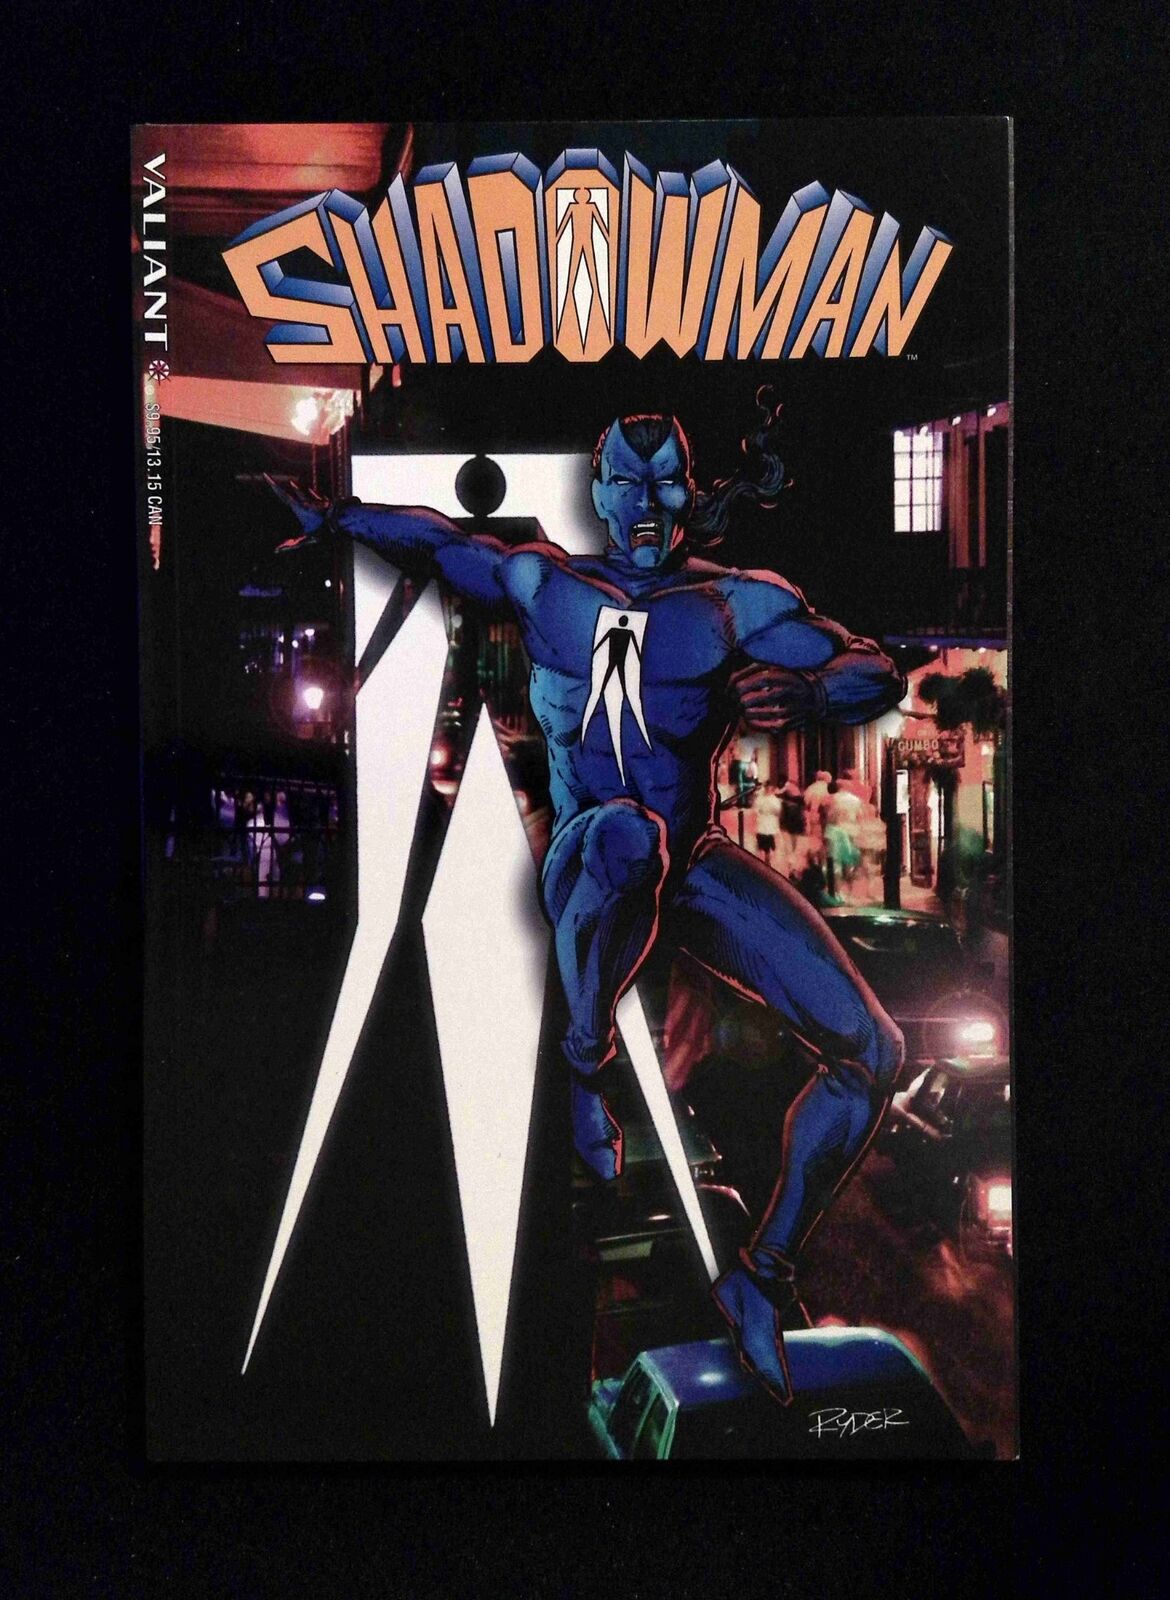 Shadowman #1-1STB Valiant 1994 NM+ Unbagged Not Include Dark Passages TPB